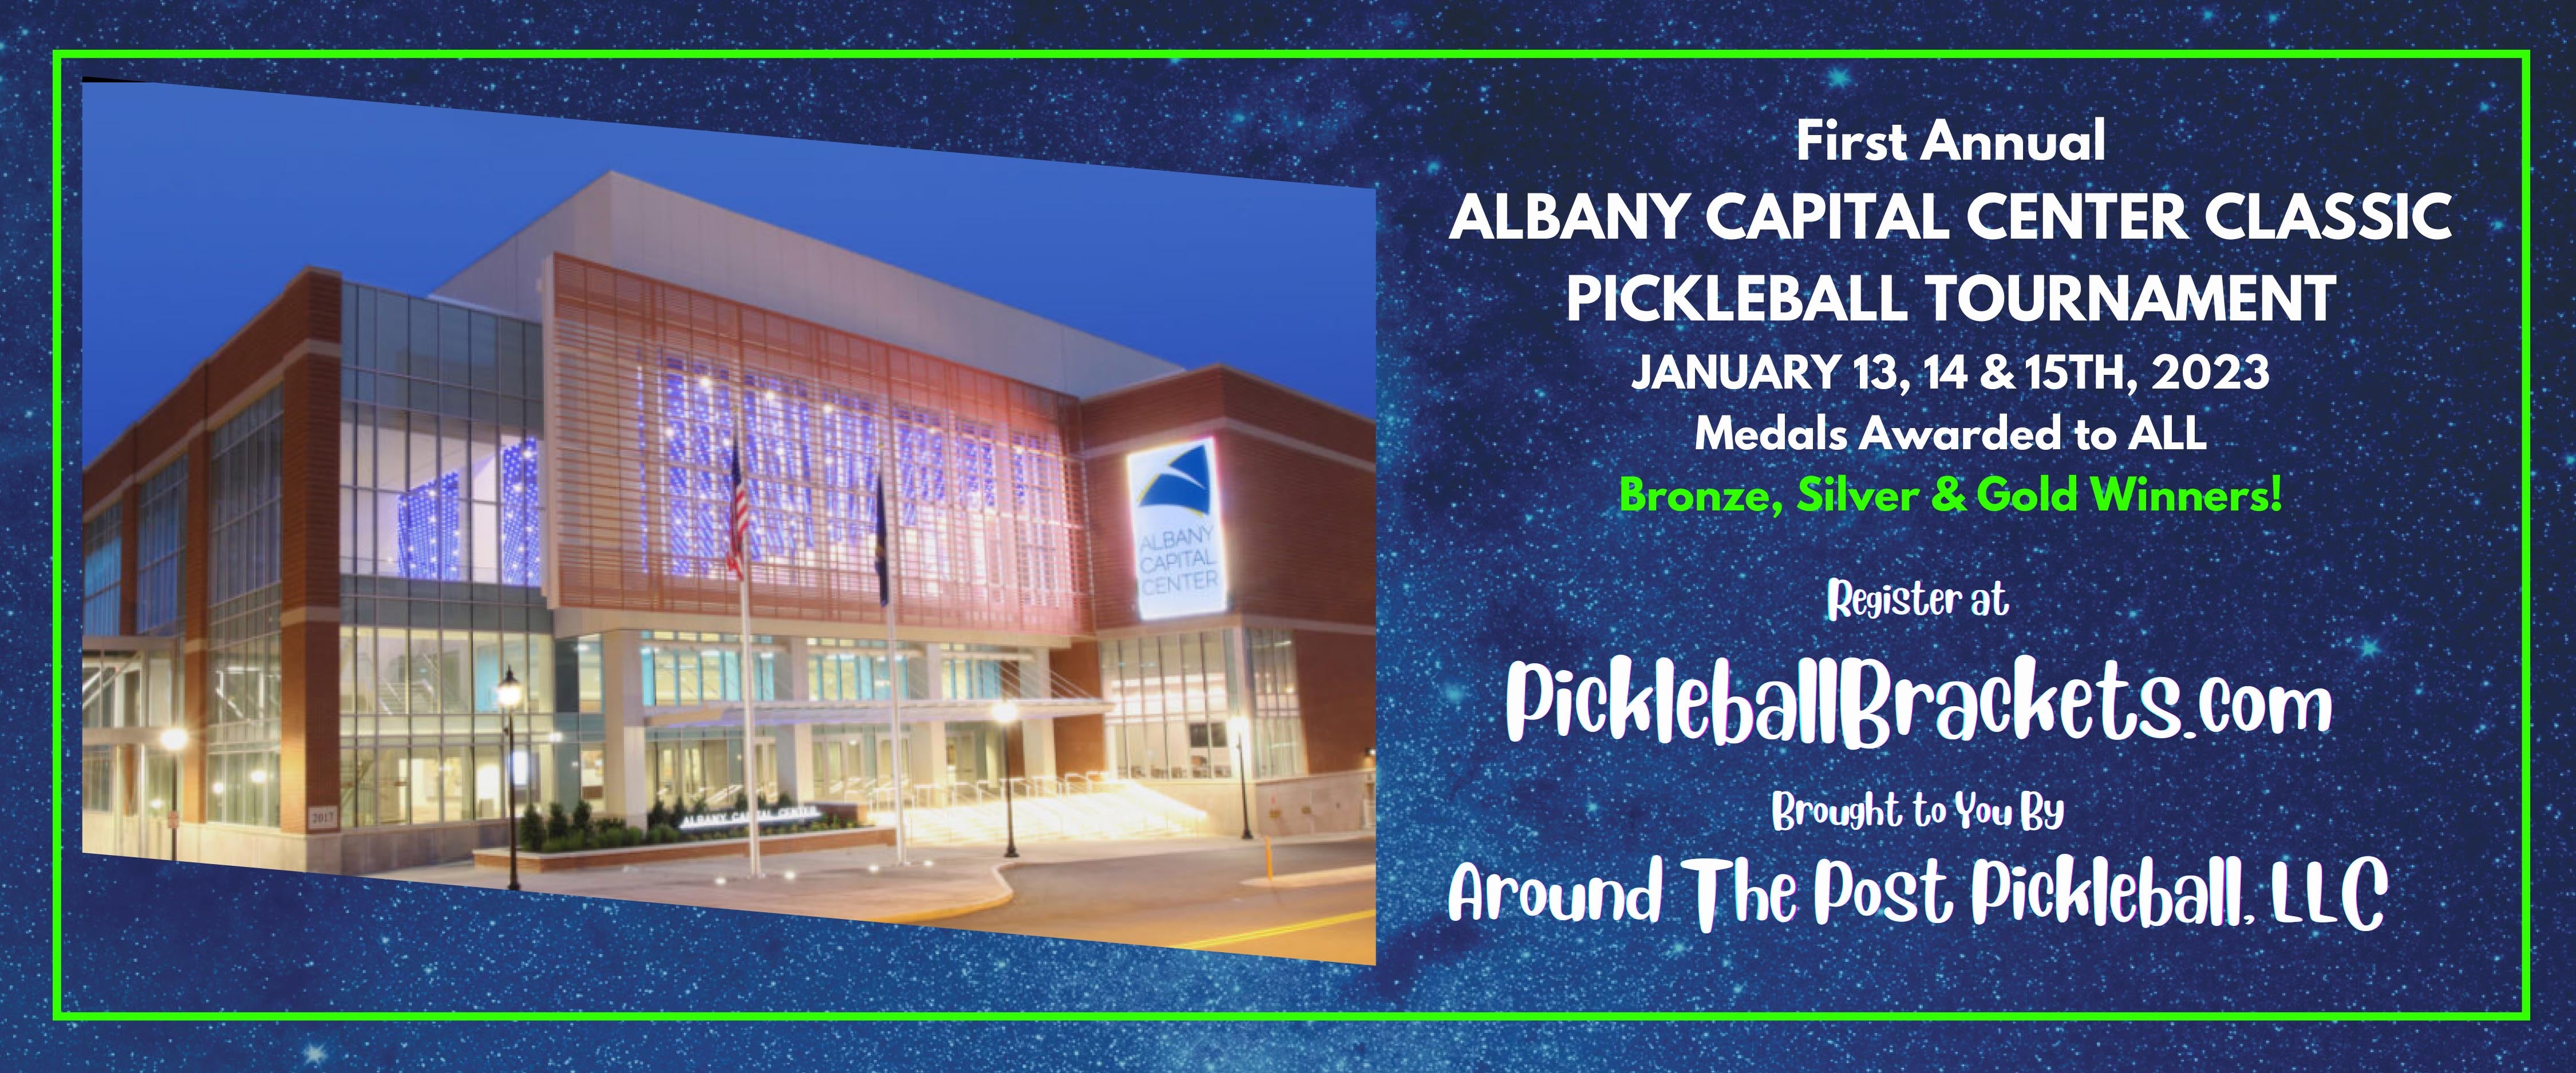 First Annual Albany Capital Center Pickleball Tournament